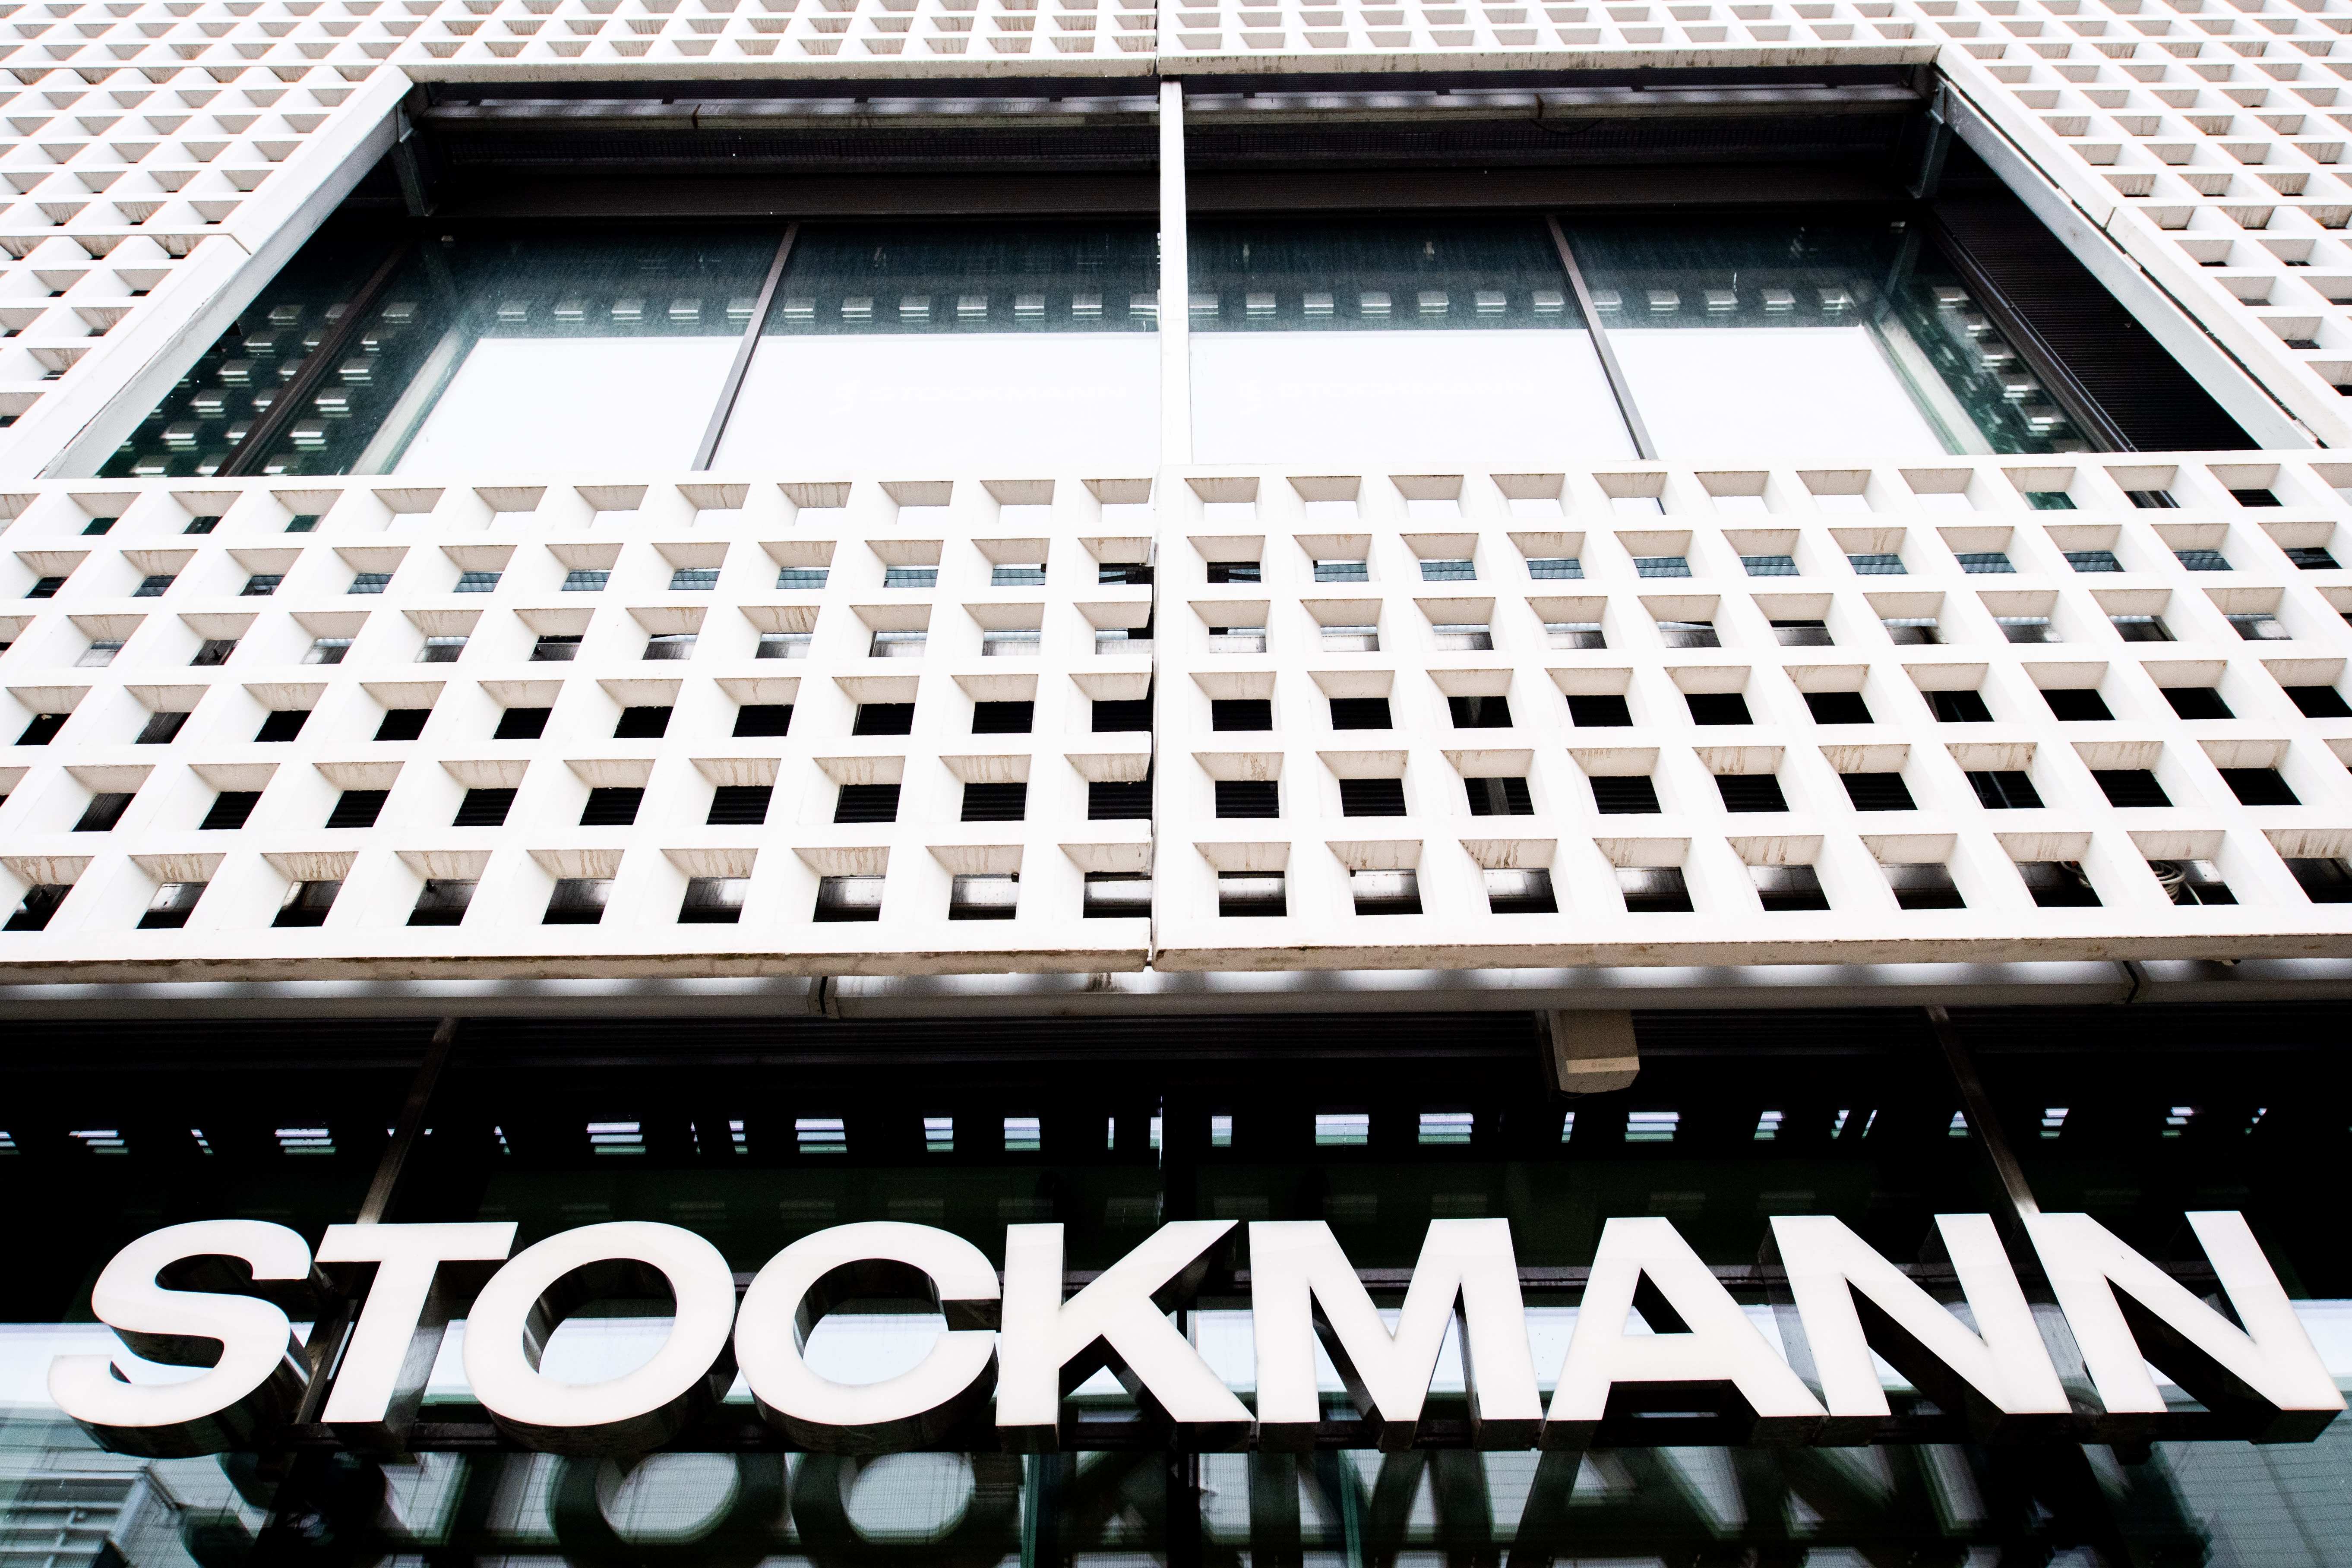 Dozens of jobs are threatened when Stockmann starts co-operation negotiations